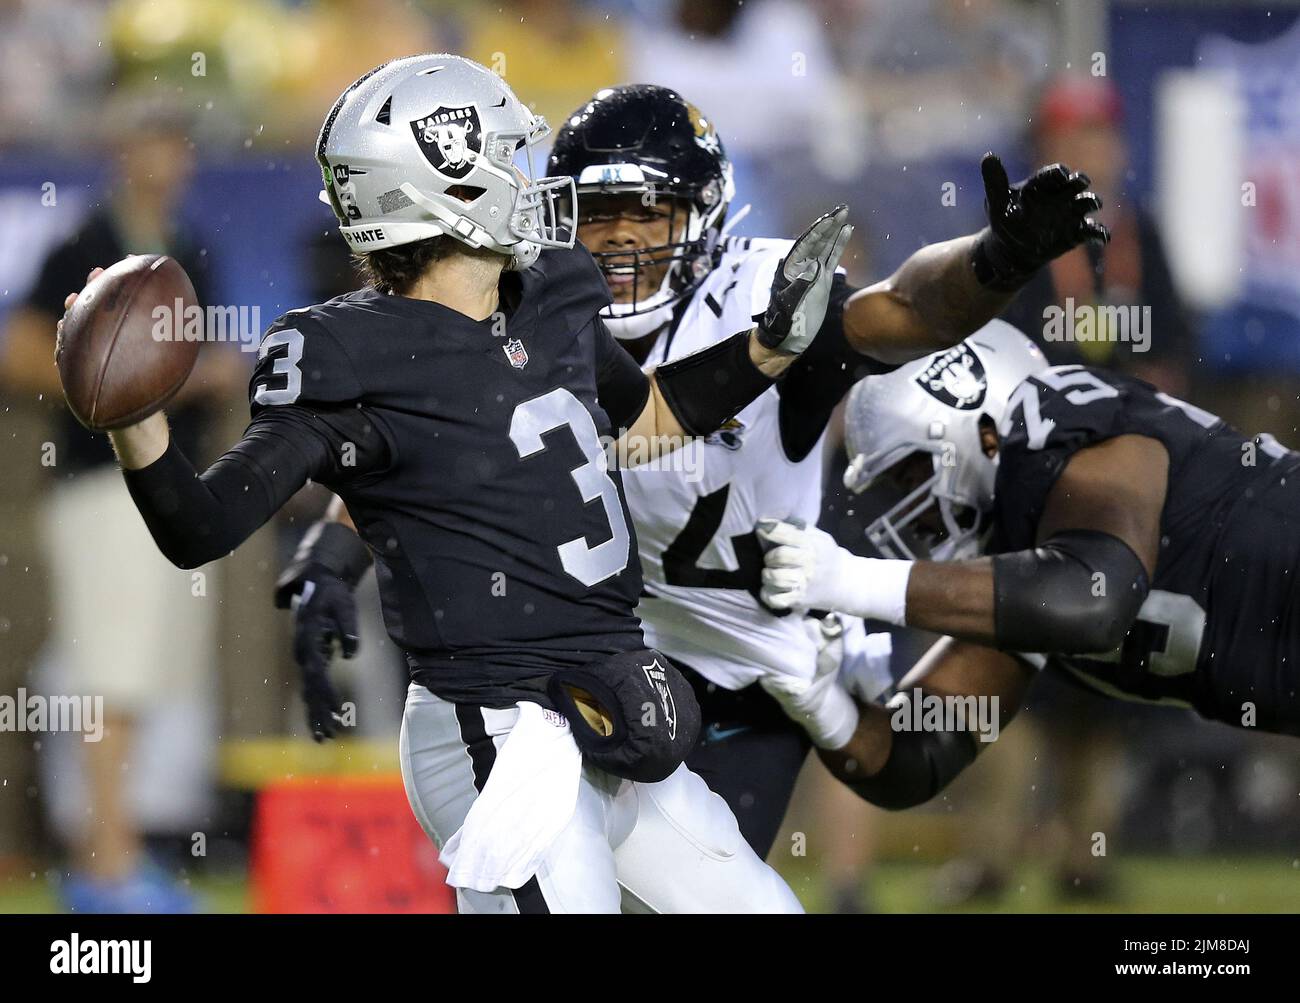 Canton, United States. 04th Aug, 2022. Las Vegas Raiders Jarrett Stidham (3) is hit by Jacksonville Jaguars Travon Walker (44) as he is blocked by Raiders lineman Jermaine Eluemunor (75) in the first quarter of the Pro Football Hall of Game in Canton, Ohio, on Thursday, August 4, 2022. Photo by Aaron Josefczyk/UPI Credit: UPI/Alamy Live News Stock Photo